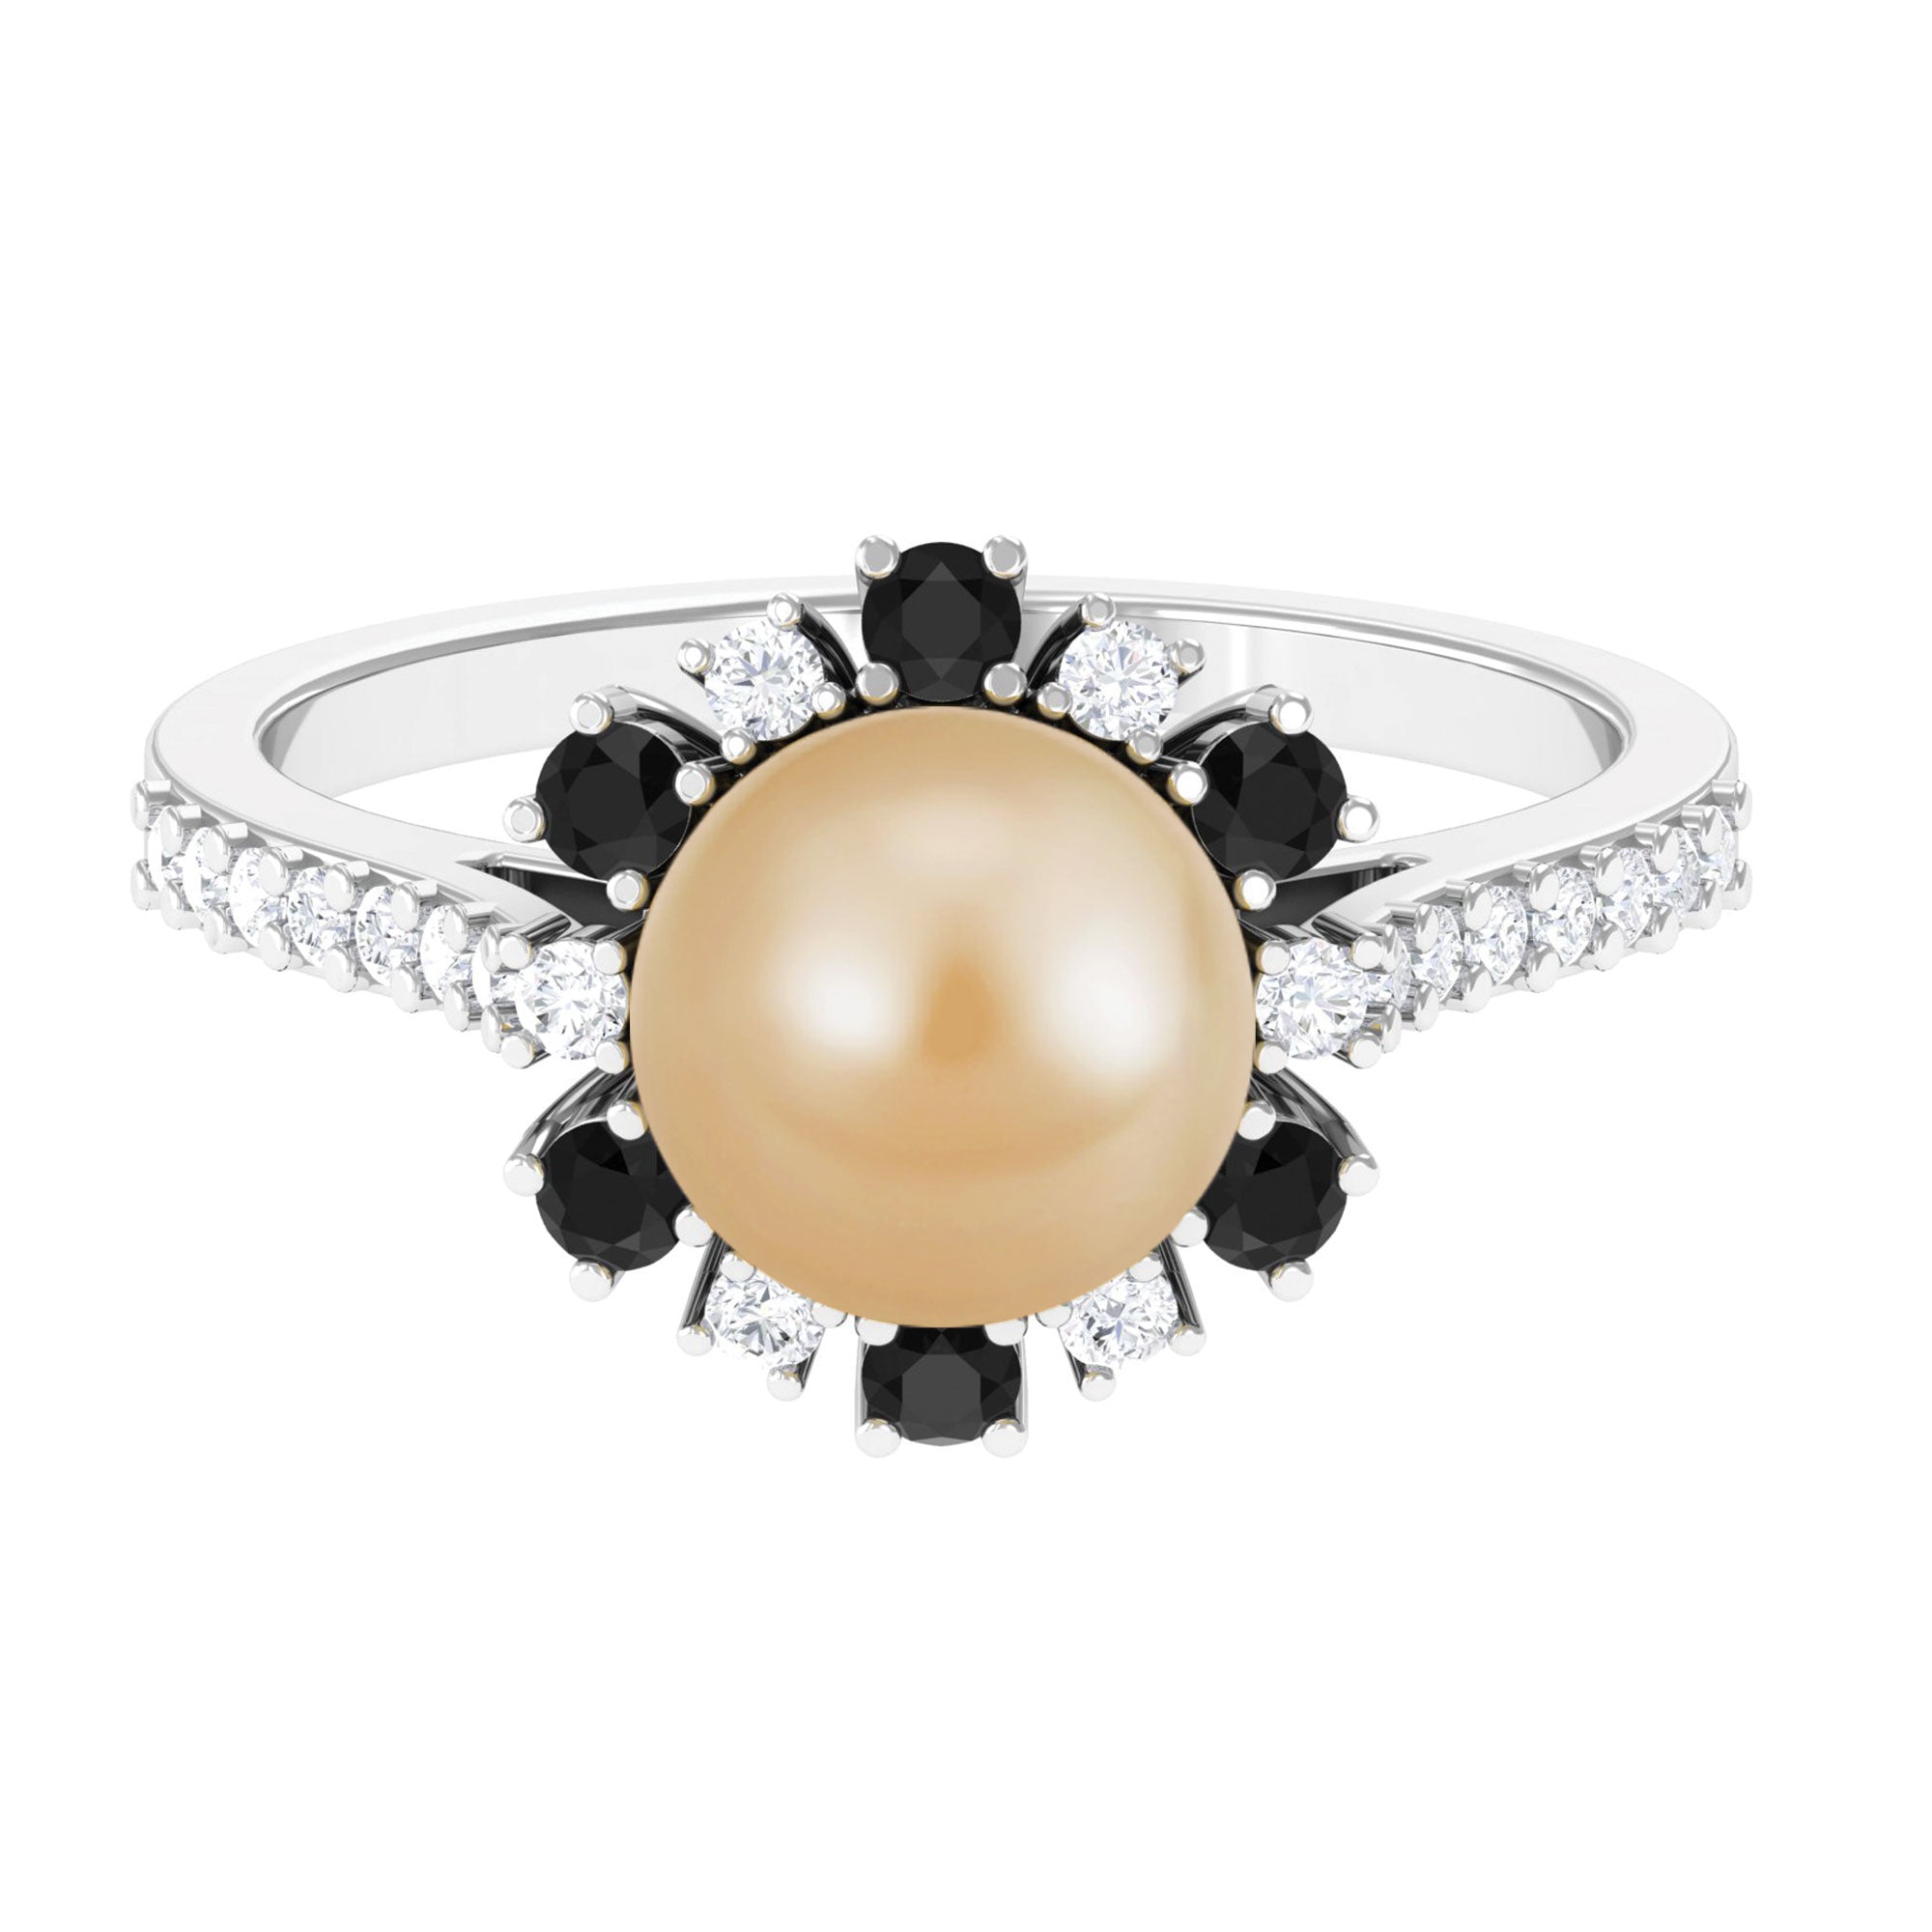 Golden Pearl Floral Halo Ring with Black and White Diamond South Sea Pearl-AAA Quality - Arisha Jewels